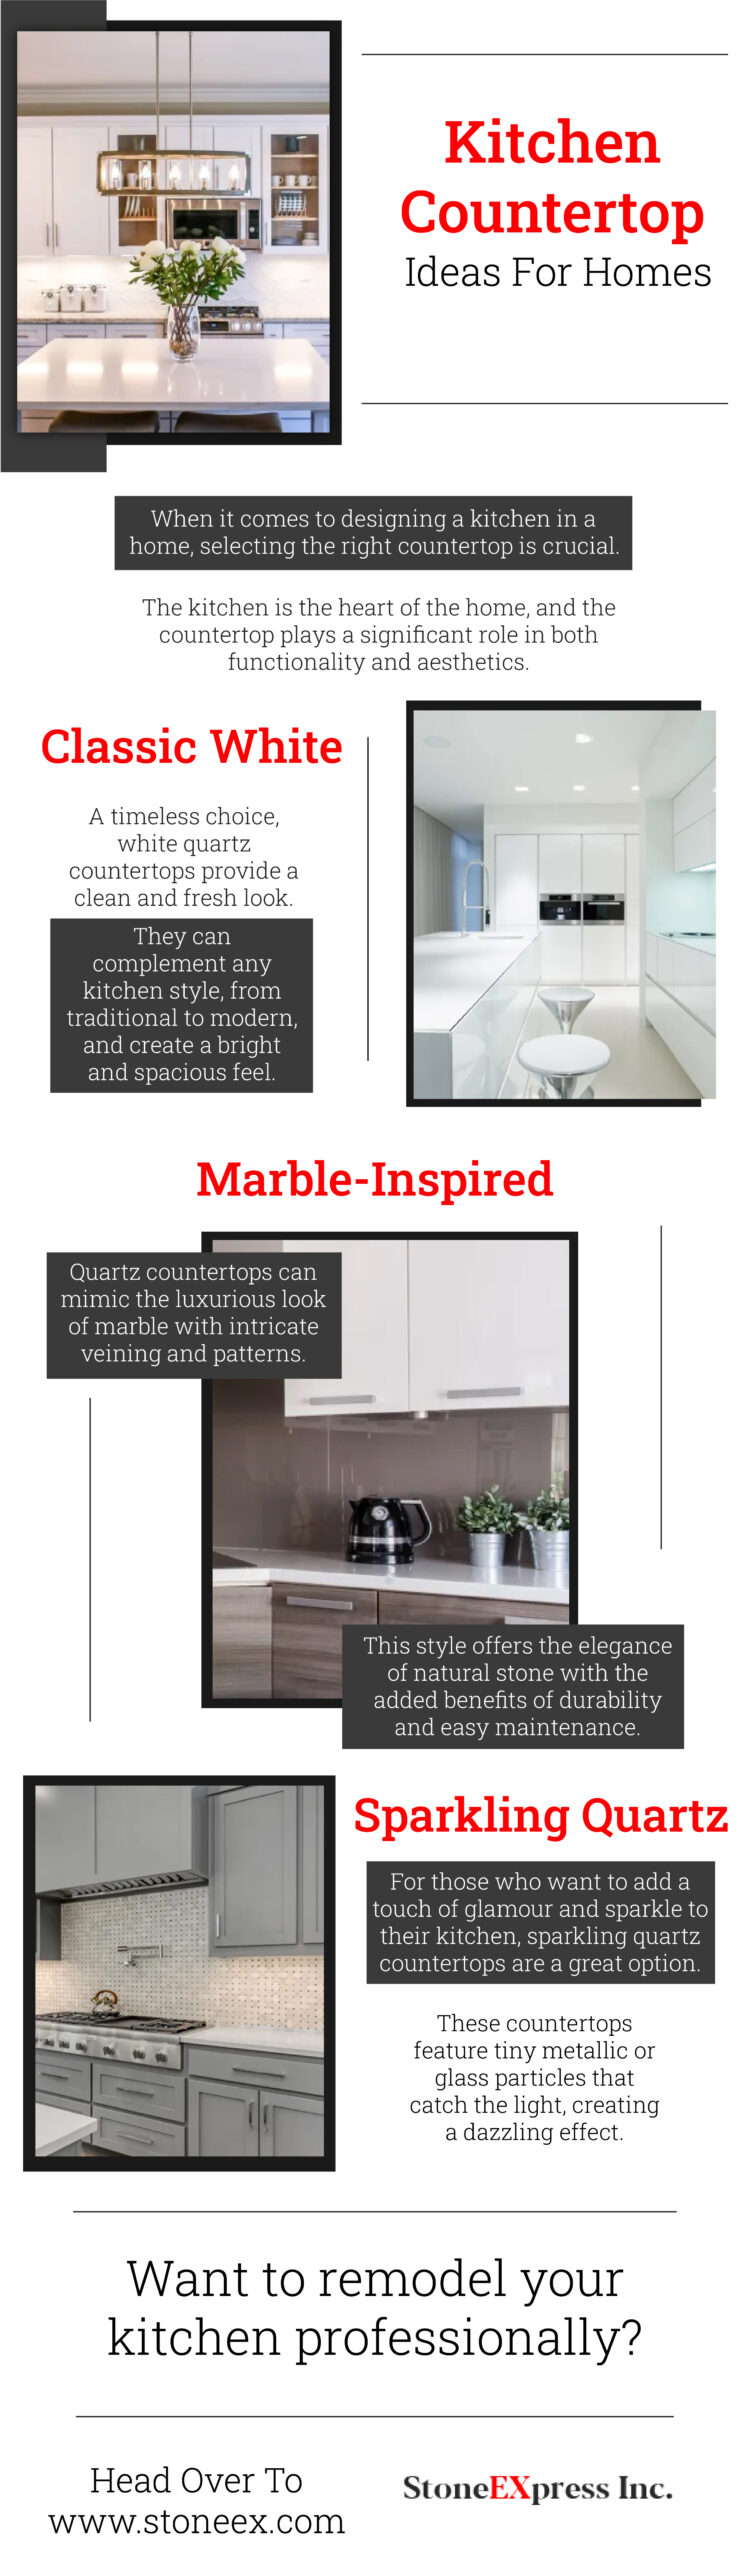 Kitchen Countertop Ideas For Homes Infograph